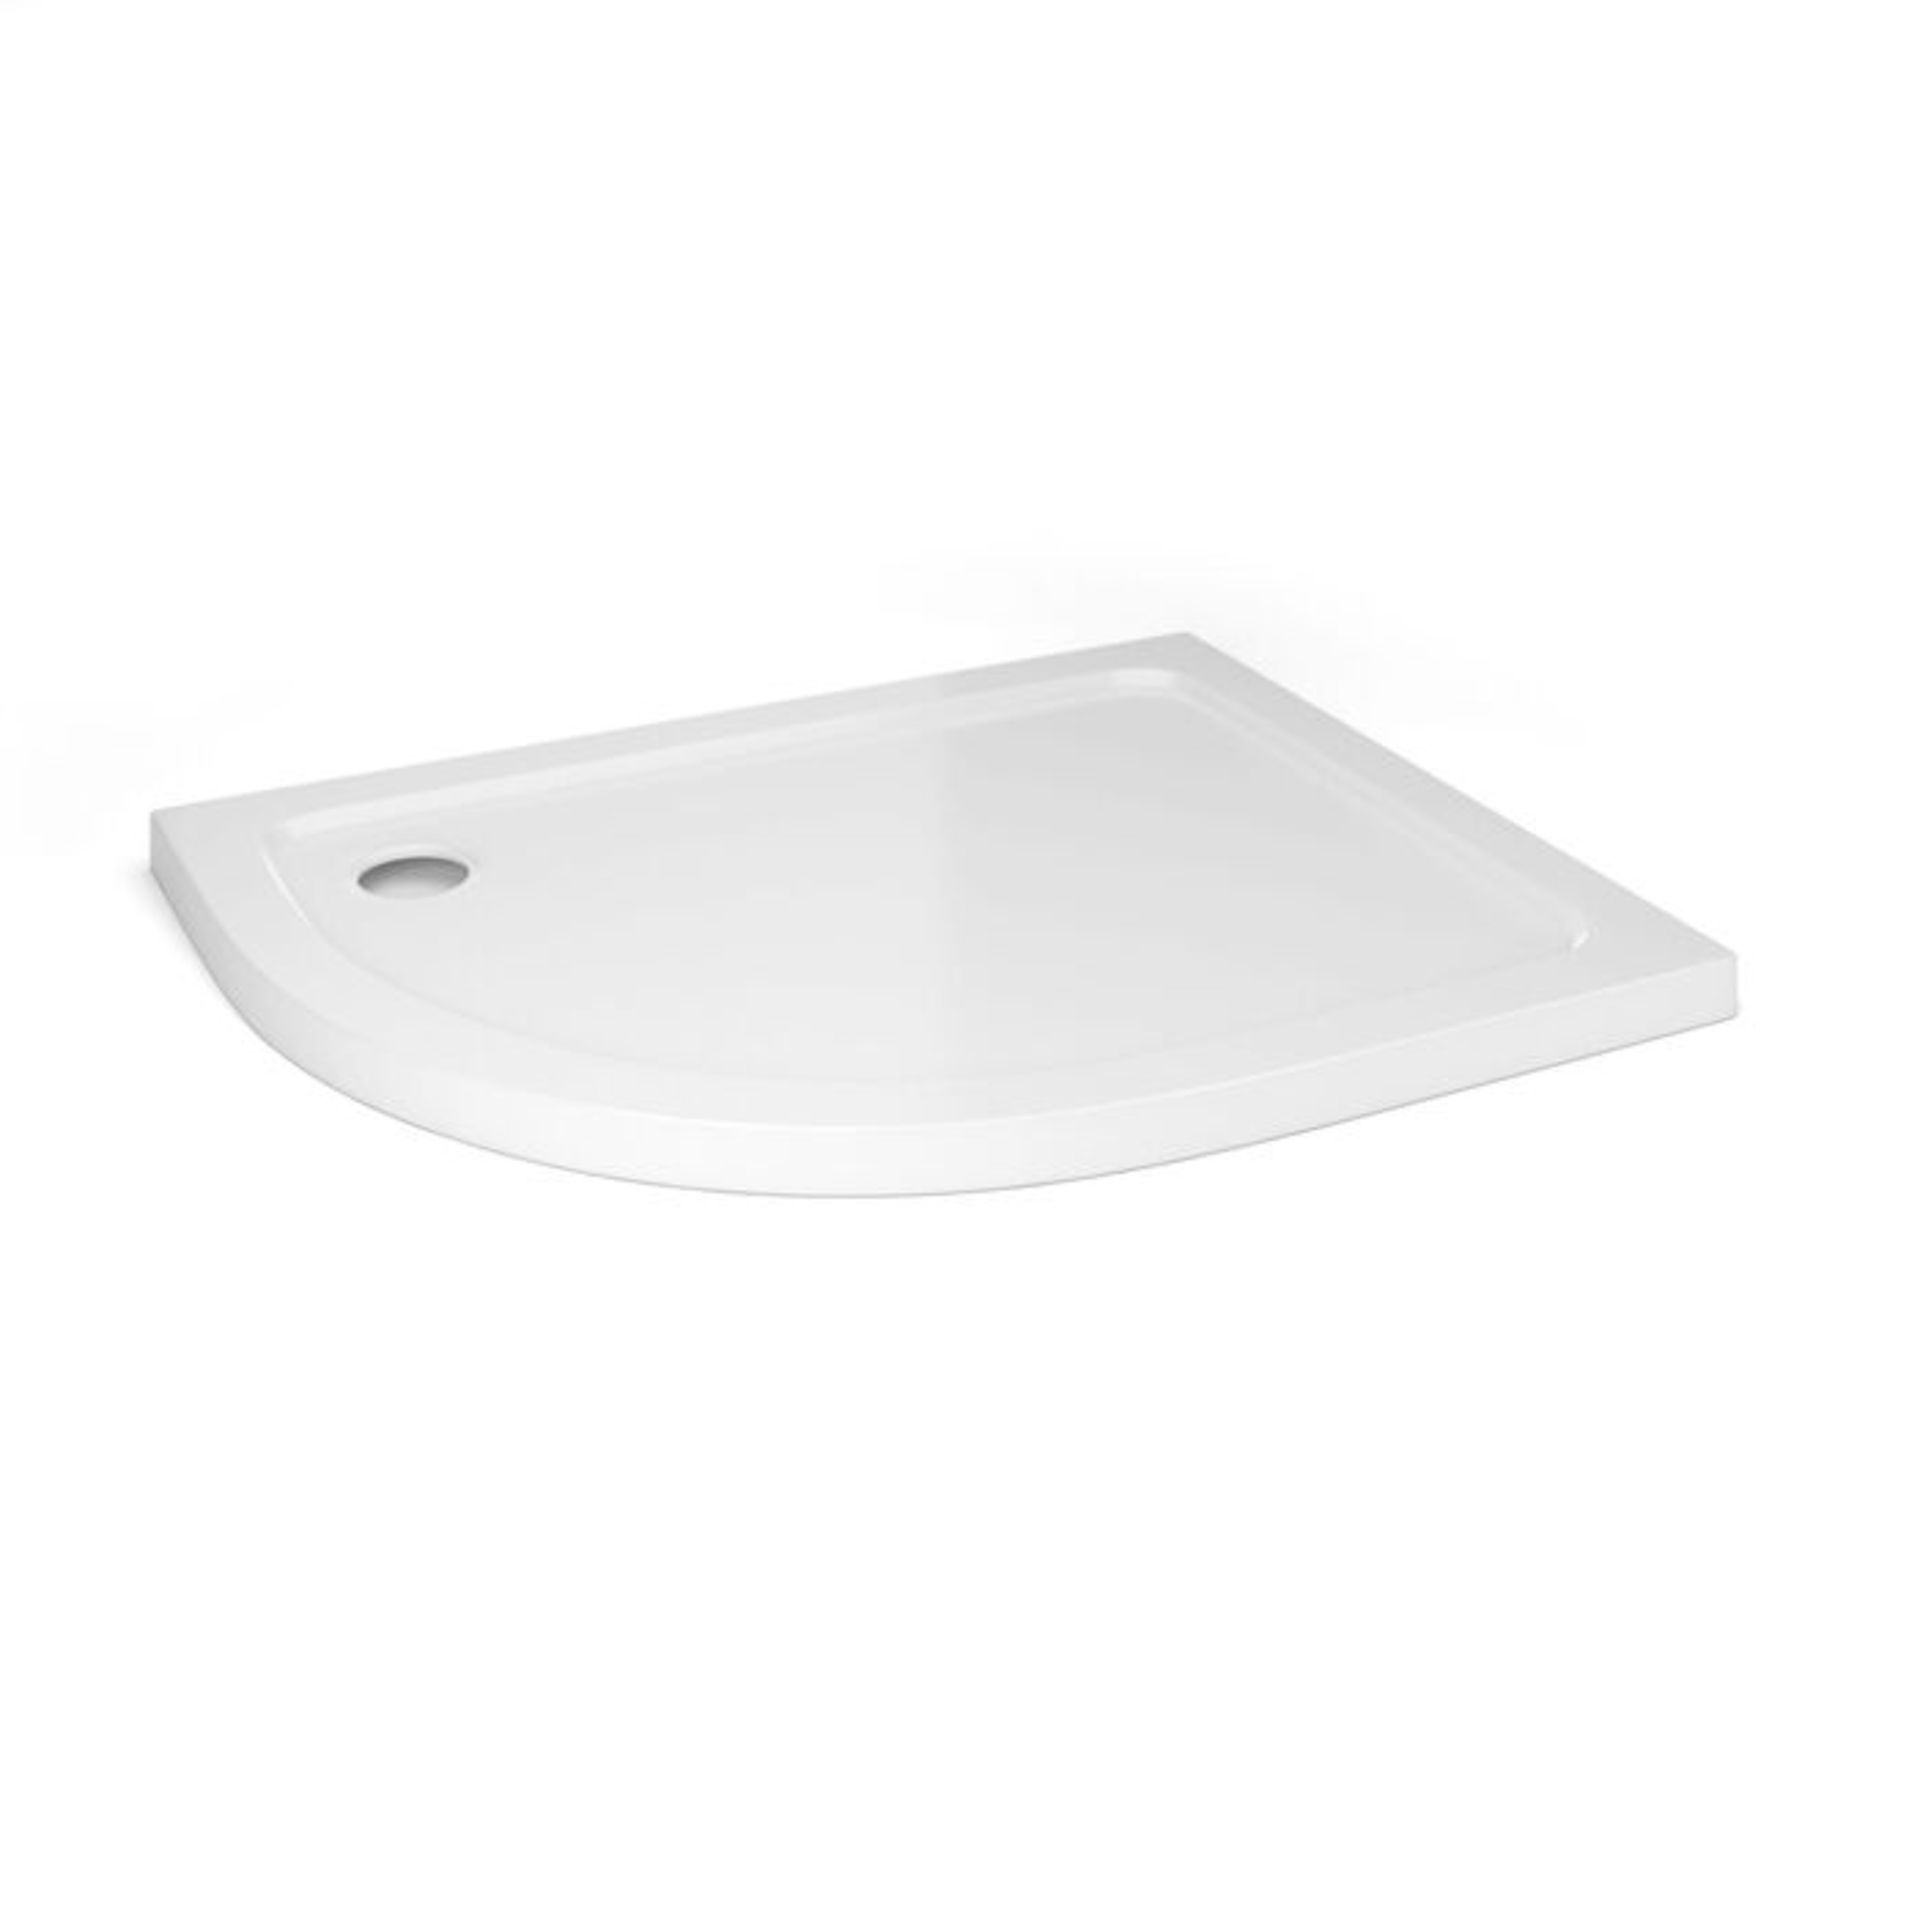 (Z232) 1000x800mm Offset Quadrant Ultra Slim Stone Shower Tray - Left. Constructed from acryli... - Image 2 of 2